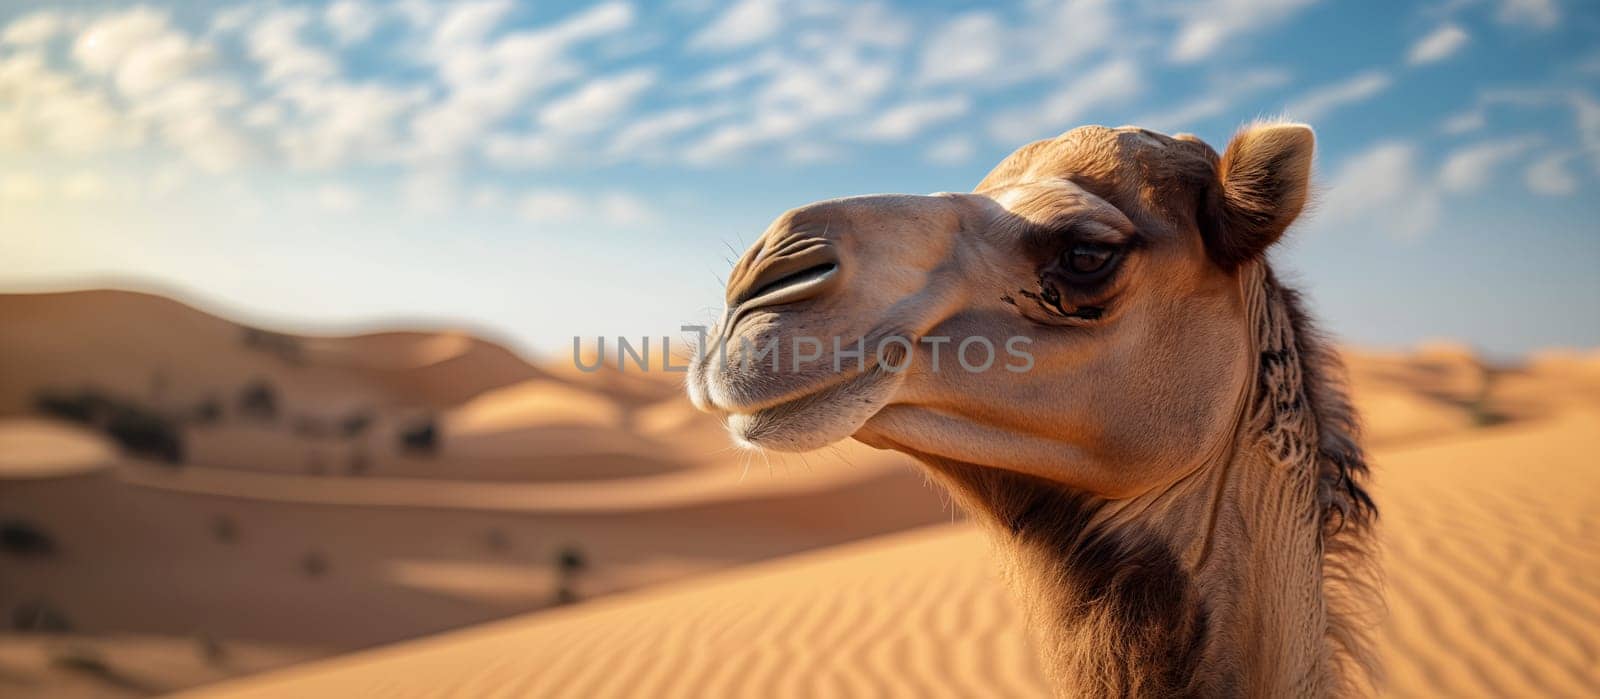 A camel gazes into the distance with soft focus desert dunes and a warm sunset sky in the background